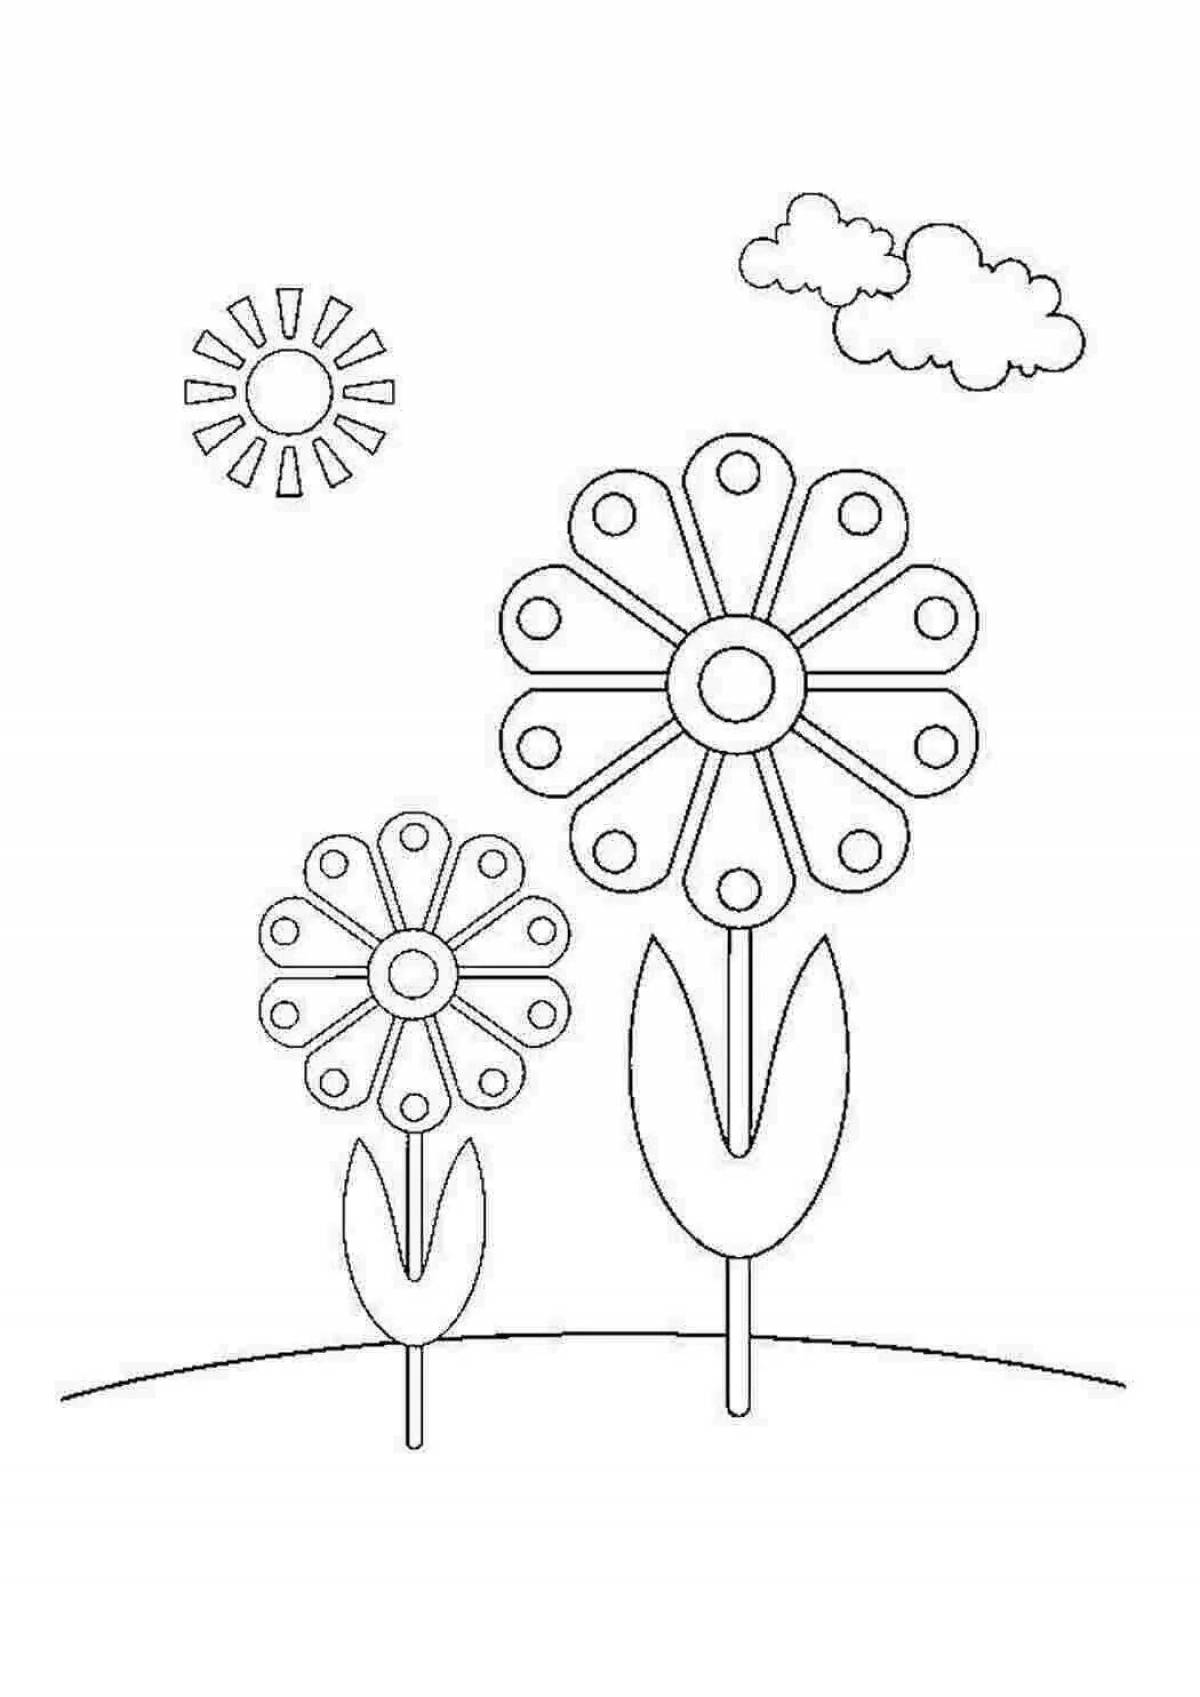 A fun spring coloring book for kids